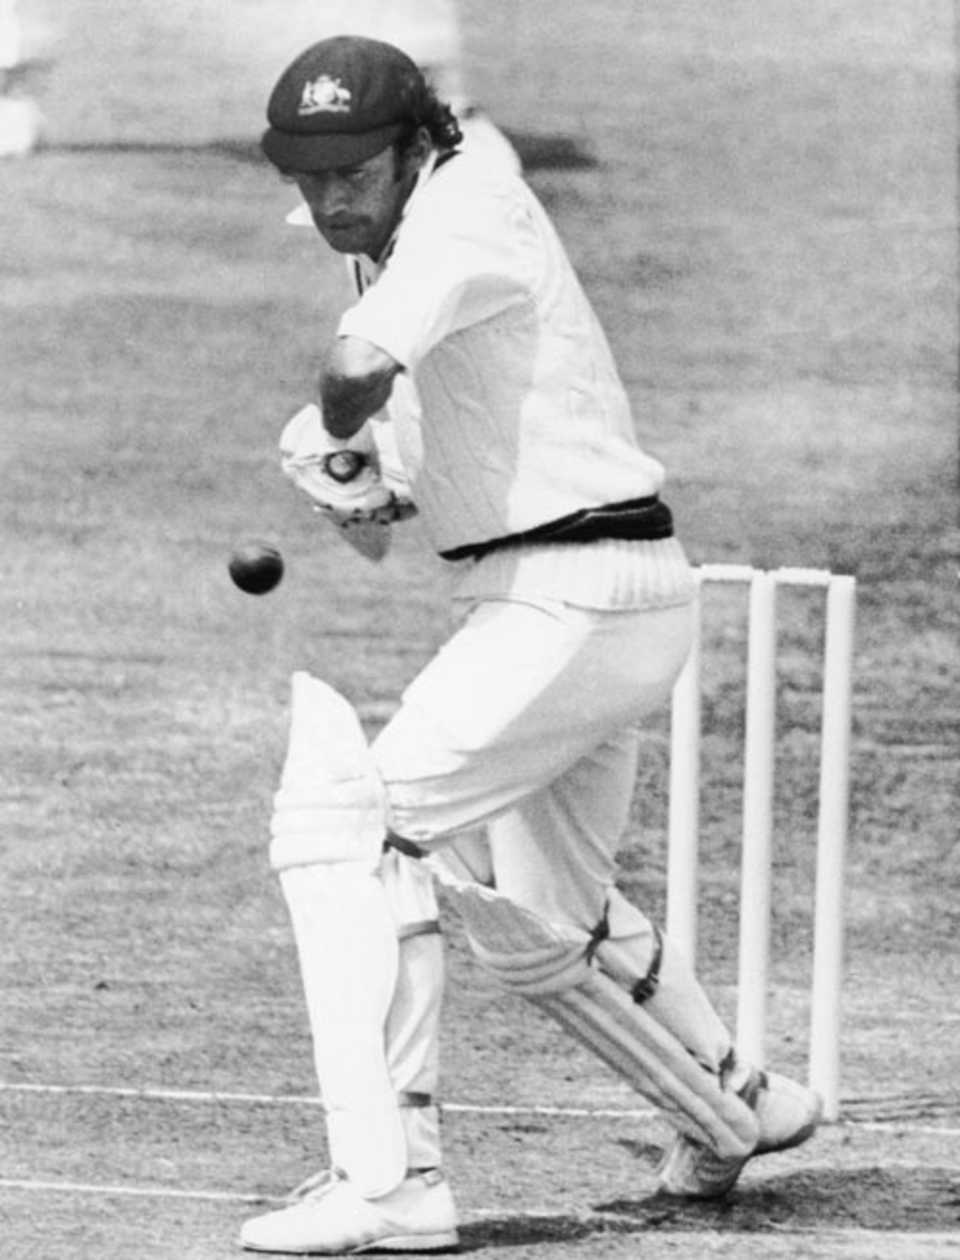 Ian Chappell prepares to defend off the front foot